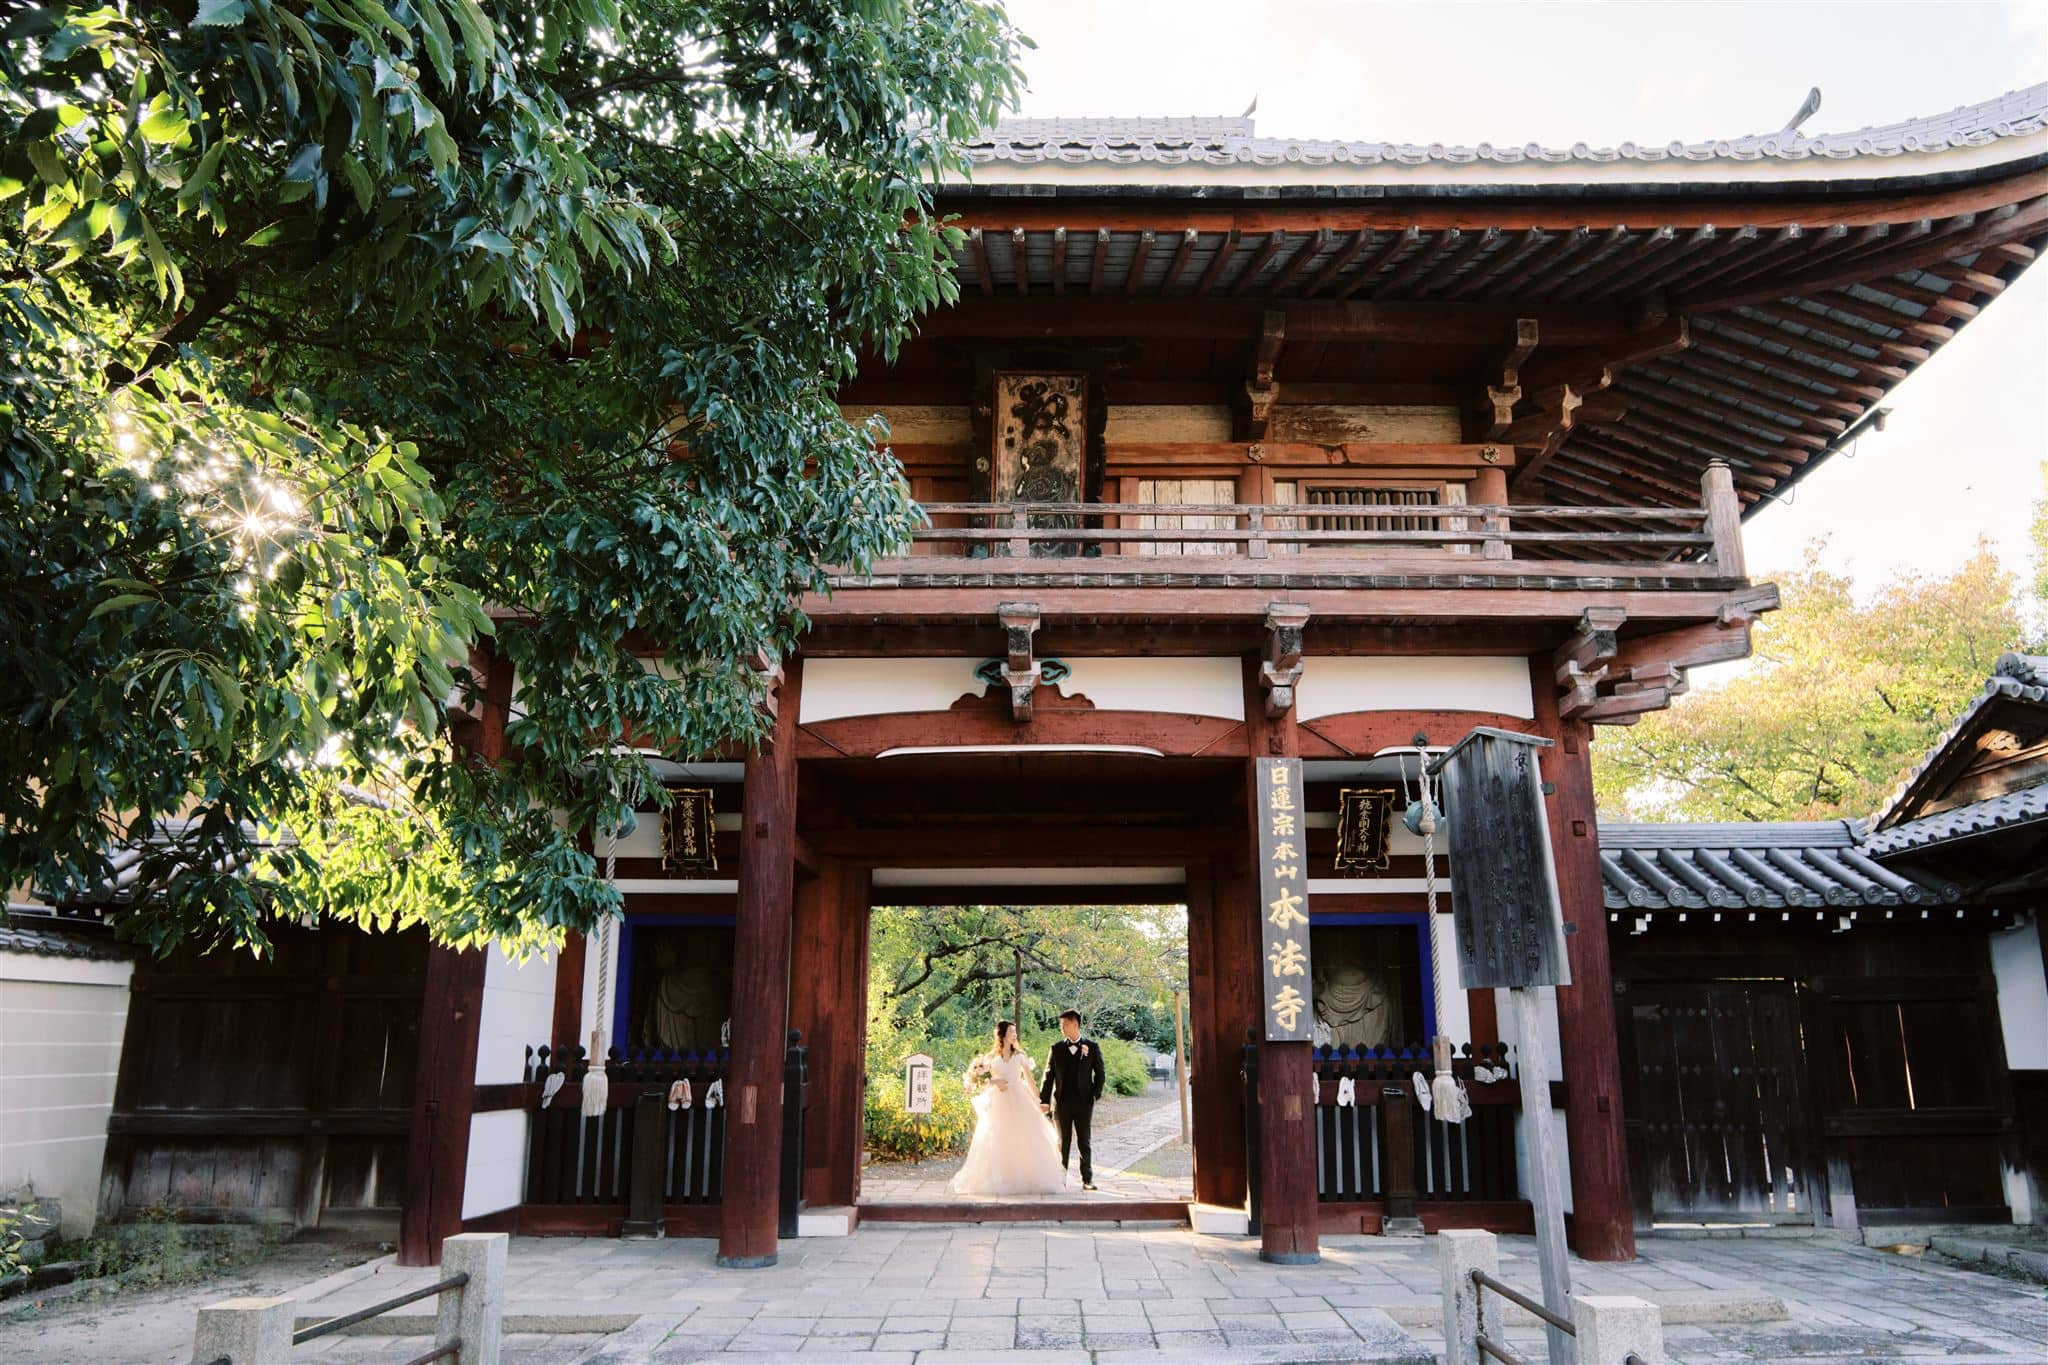 Kyoto Tokyo Japan Elopement Wedding Photographer, Planner & Videographer | A bride and groom, following the latest wedding trends, stand at the entrance of a traditional Japanese temple.